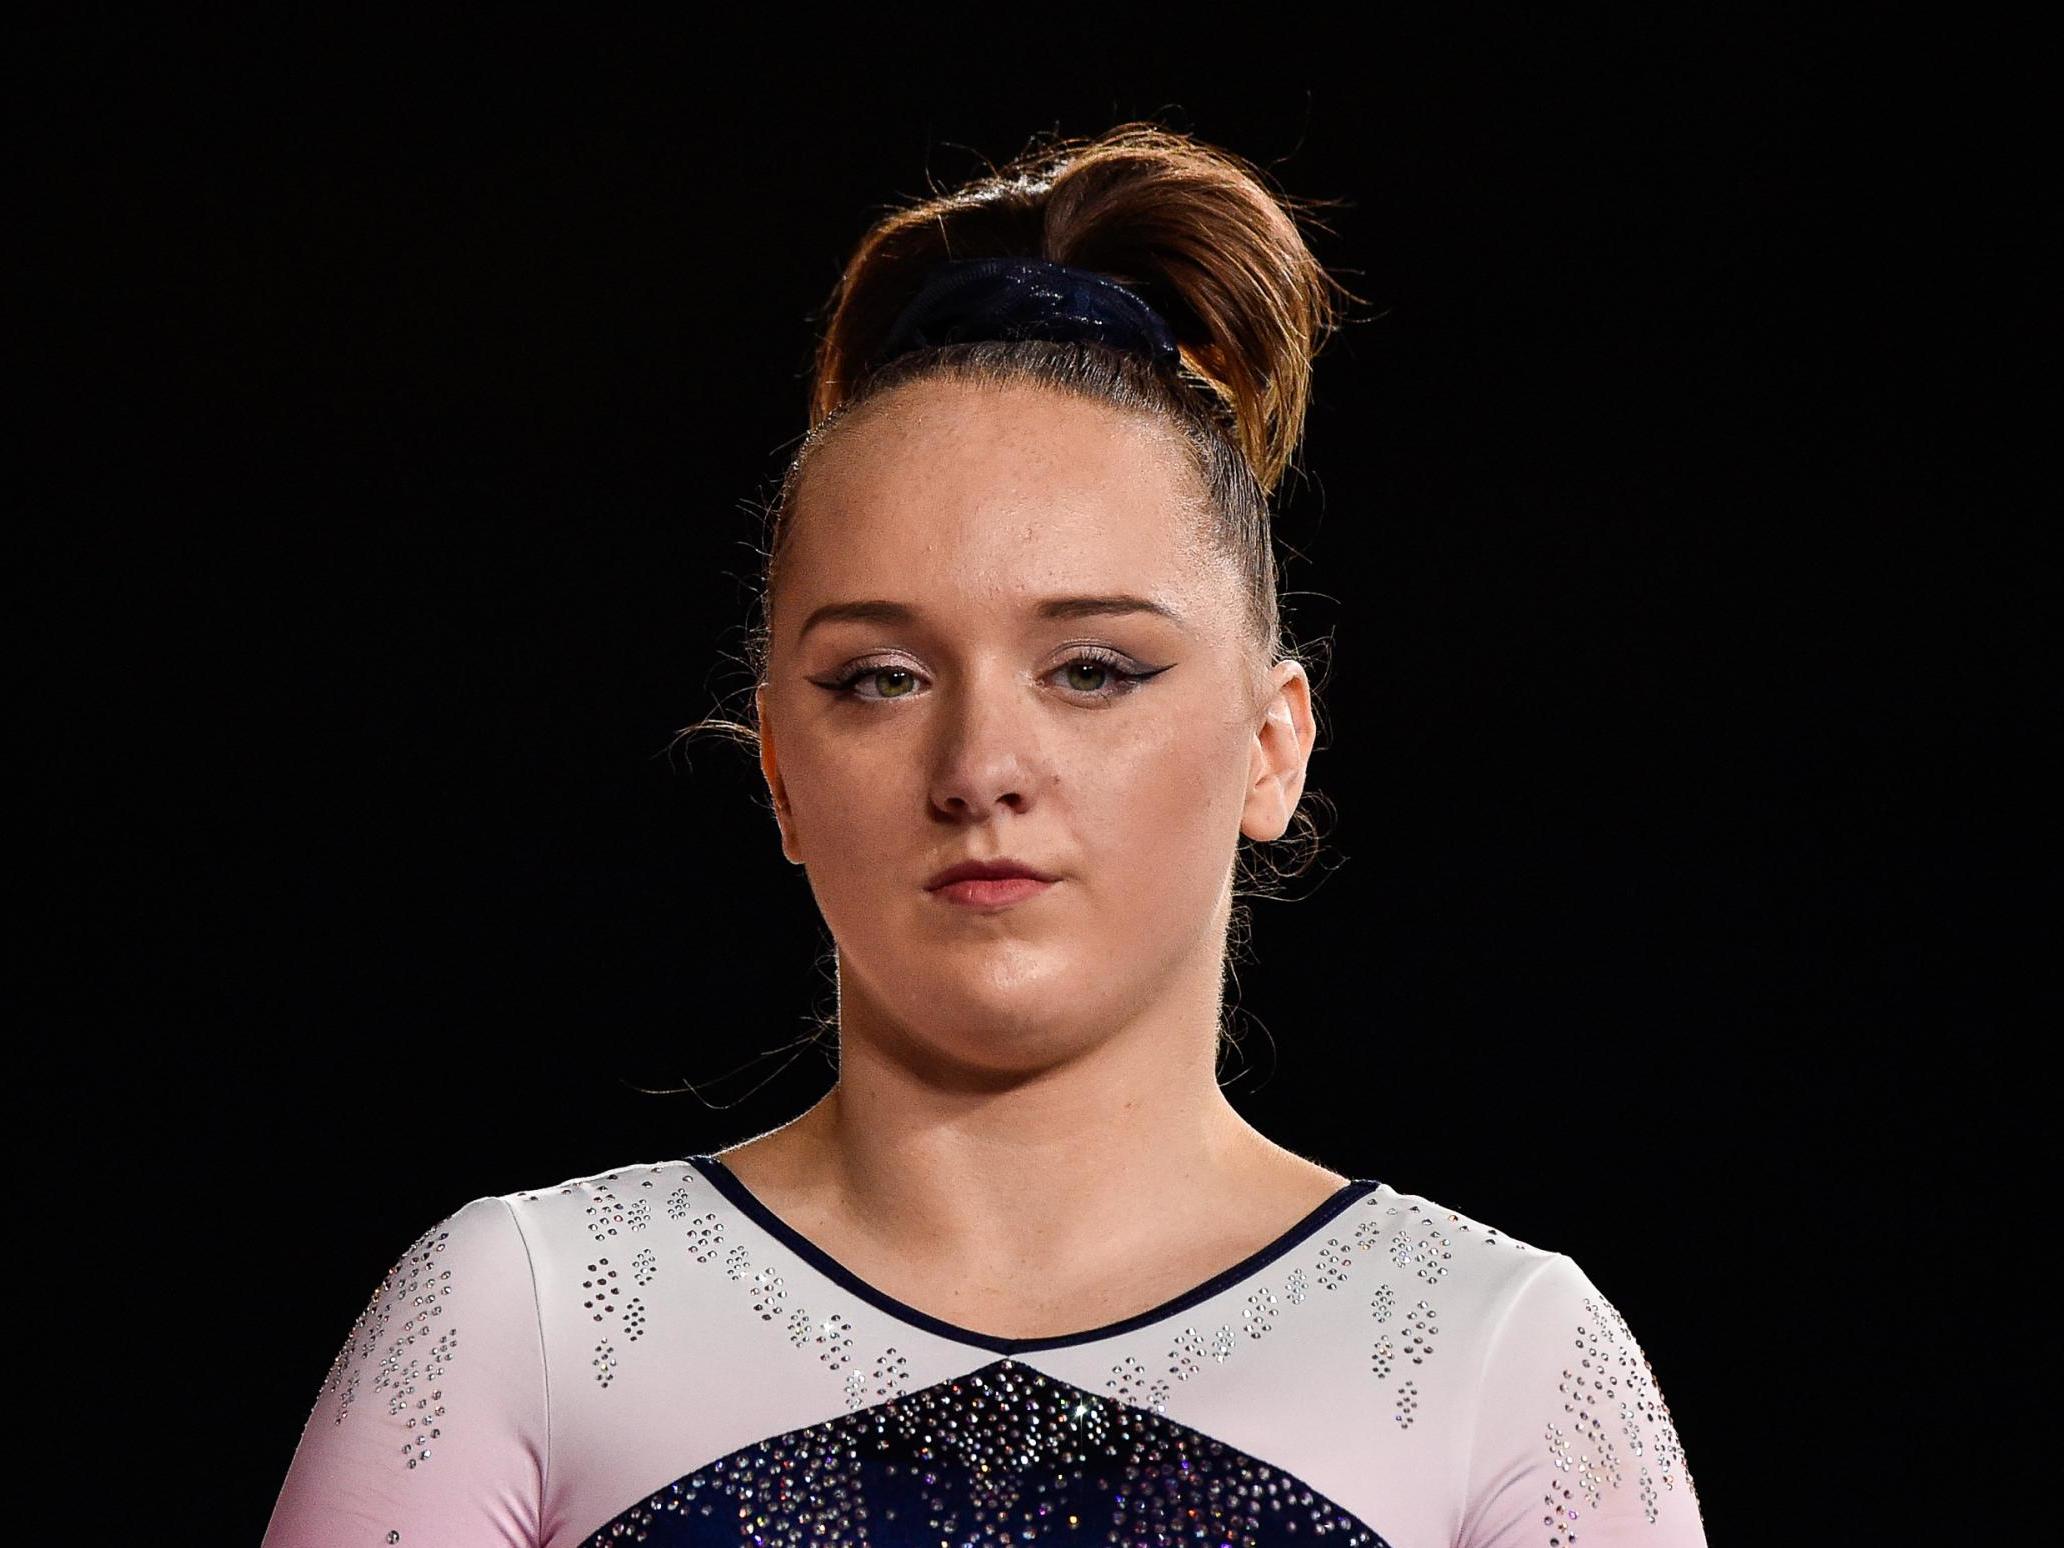 Twenty-year-old Amy Tinkler, who quit gymnastics this year, became Britain's youngest medallist at the 2016 Olympics